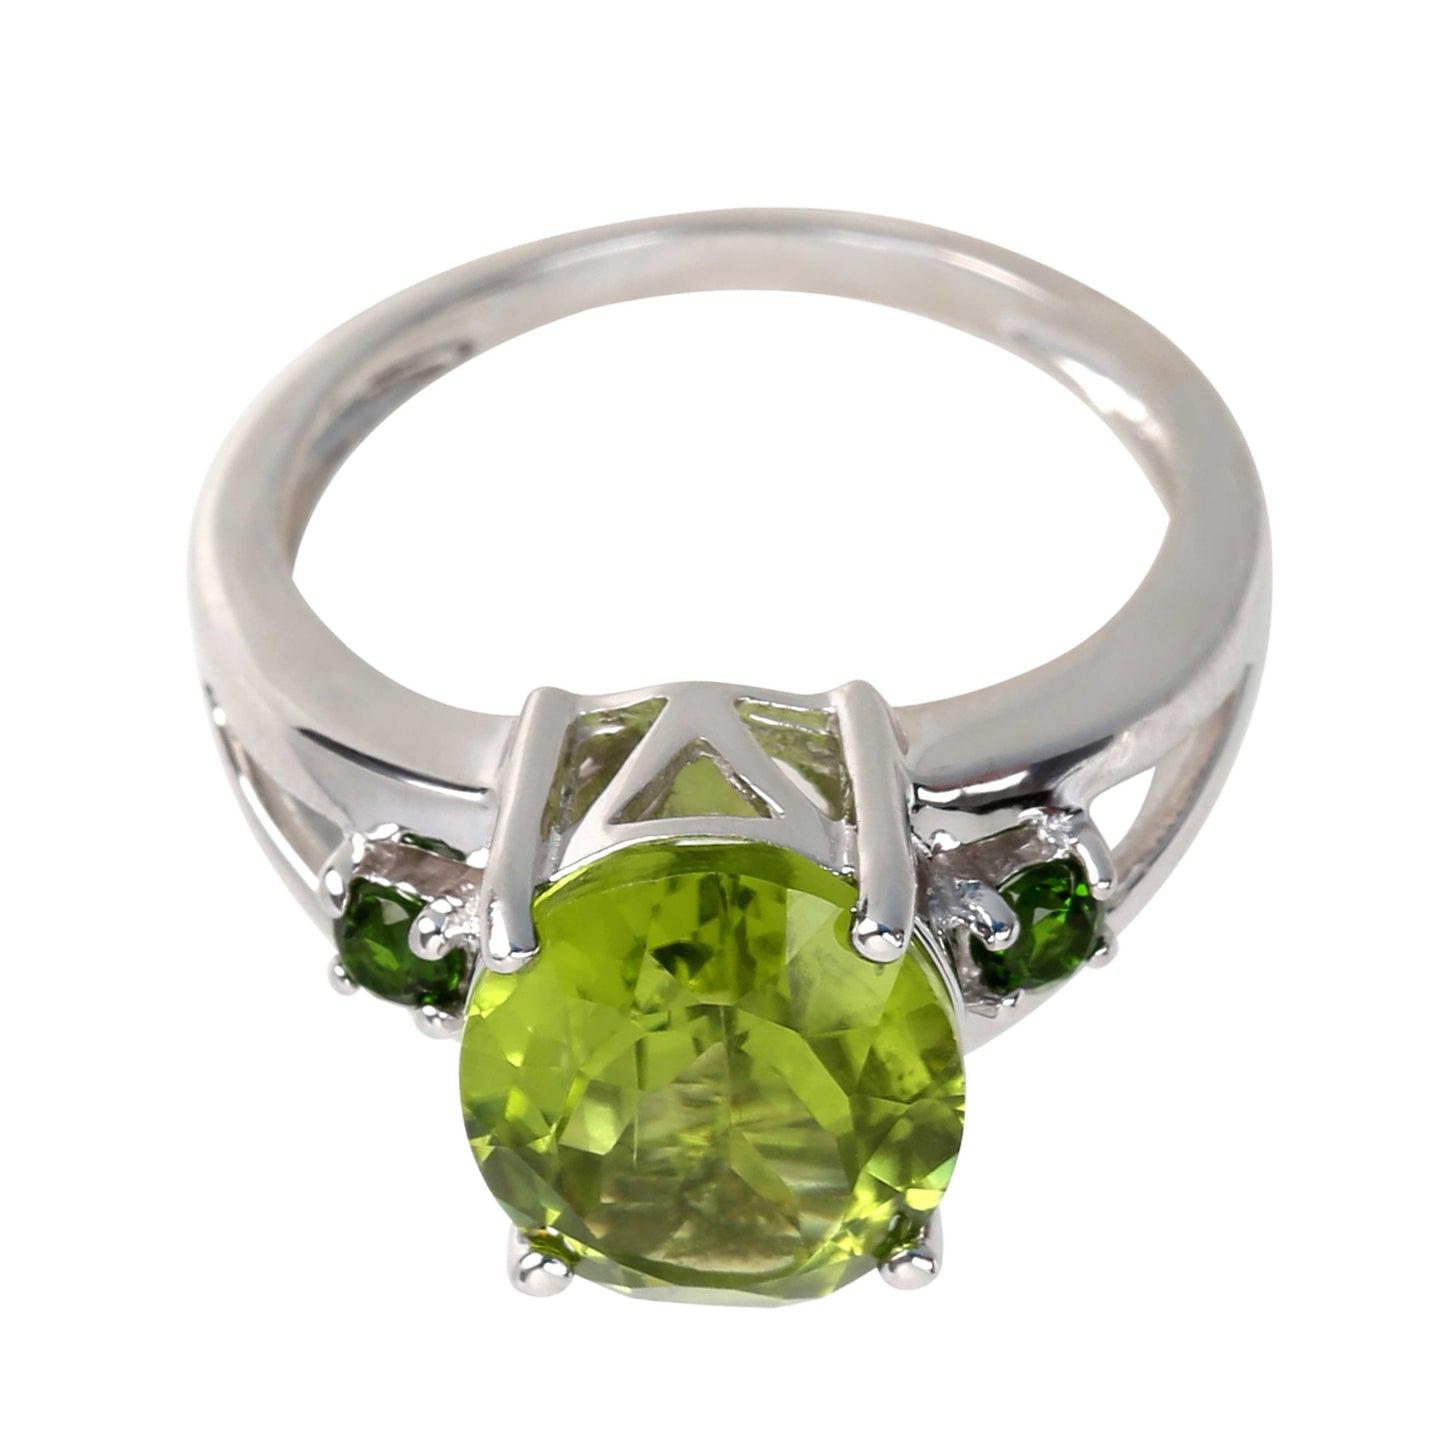 Sterling Silver 925 Peridot, Chrome Diopside Ring - Pinctore